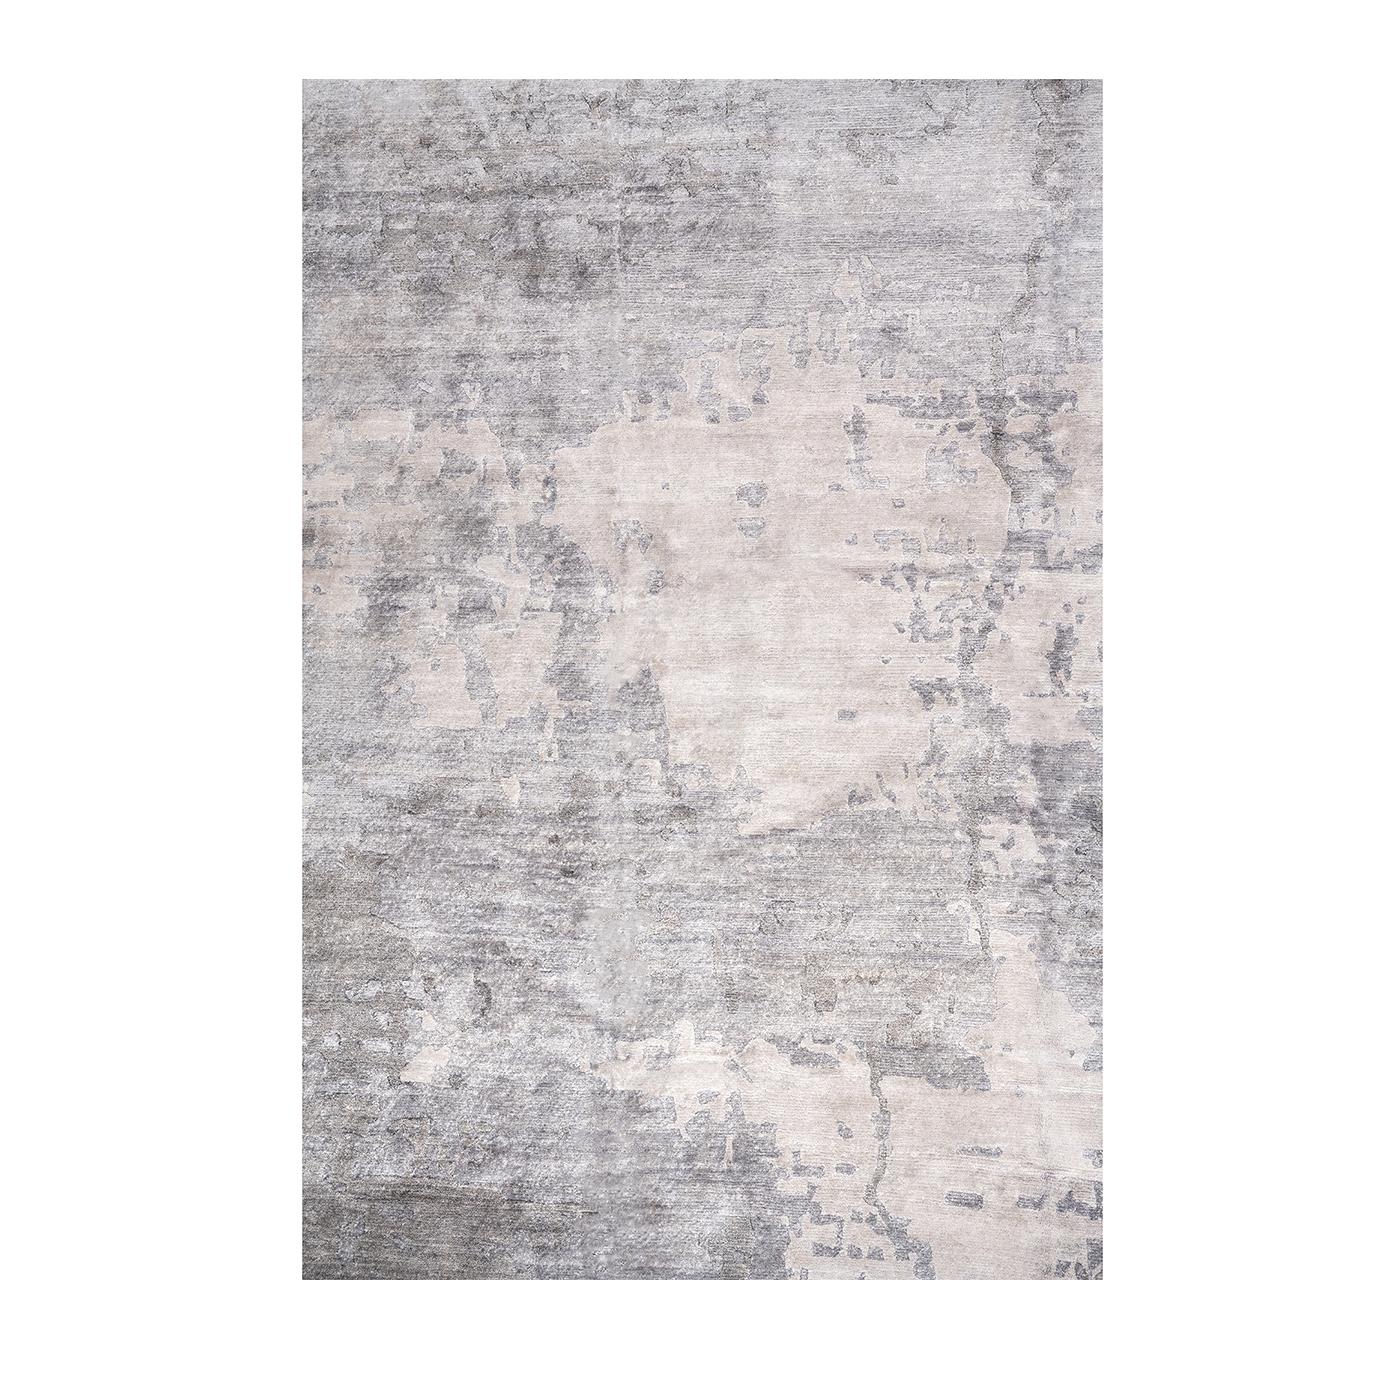 Handwoven in India frpm Chinese bamboo silk, this elegant rug features a delicate abstract design obtained using the 100 line technique (100 knots per square inch) for a rich and bold design. Evoking a dreamy atmosphere, the pattern features silver,